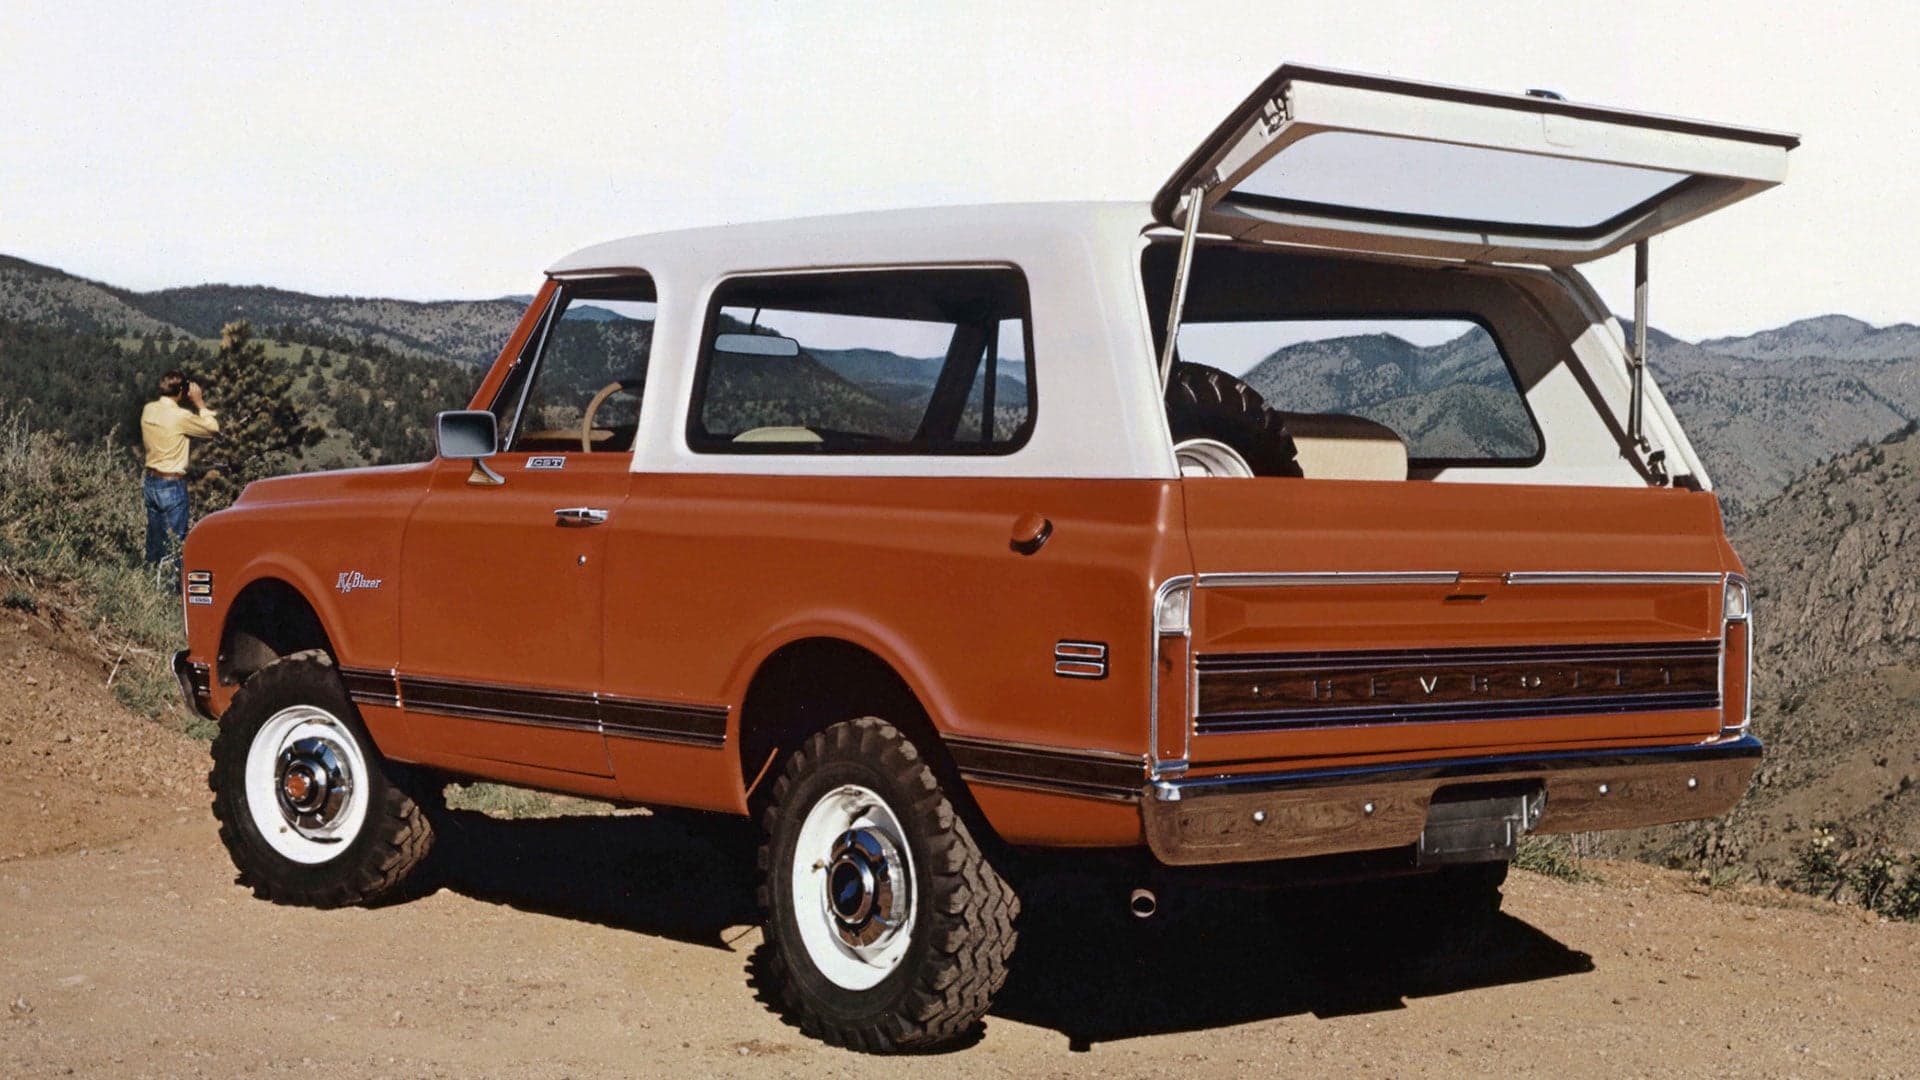 The Chevrolet Blazer K/5 Is The Vintage Truck You Need To Buy Right Now